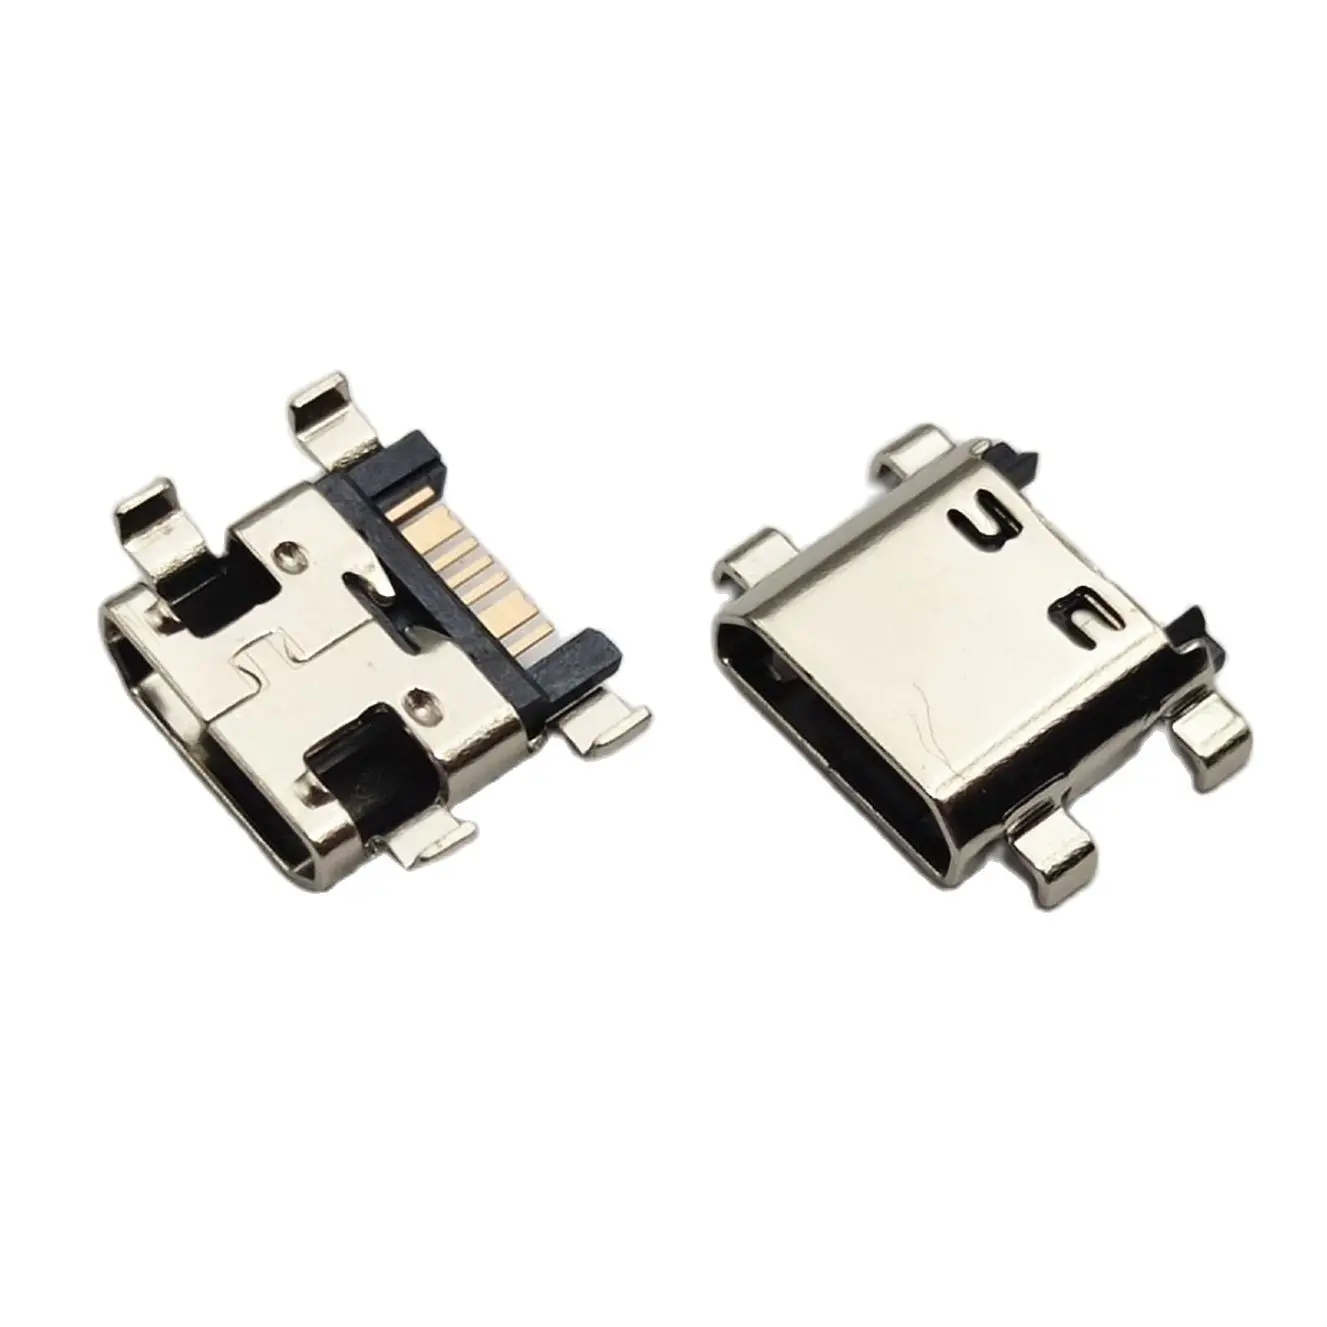 10pcs Micro USB 7pin Connector Mobile Charging port tail plug For Samsung I8262 J5 Prime On5 G5700 J7 G6100 G530 G532 J2 G3502